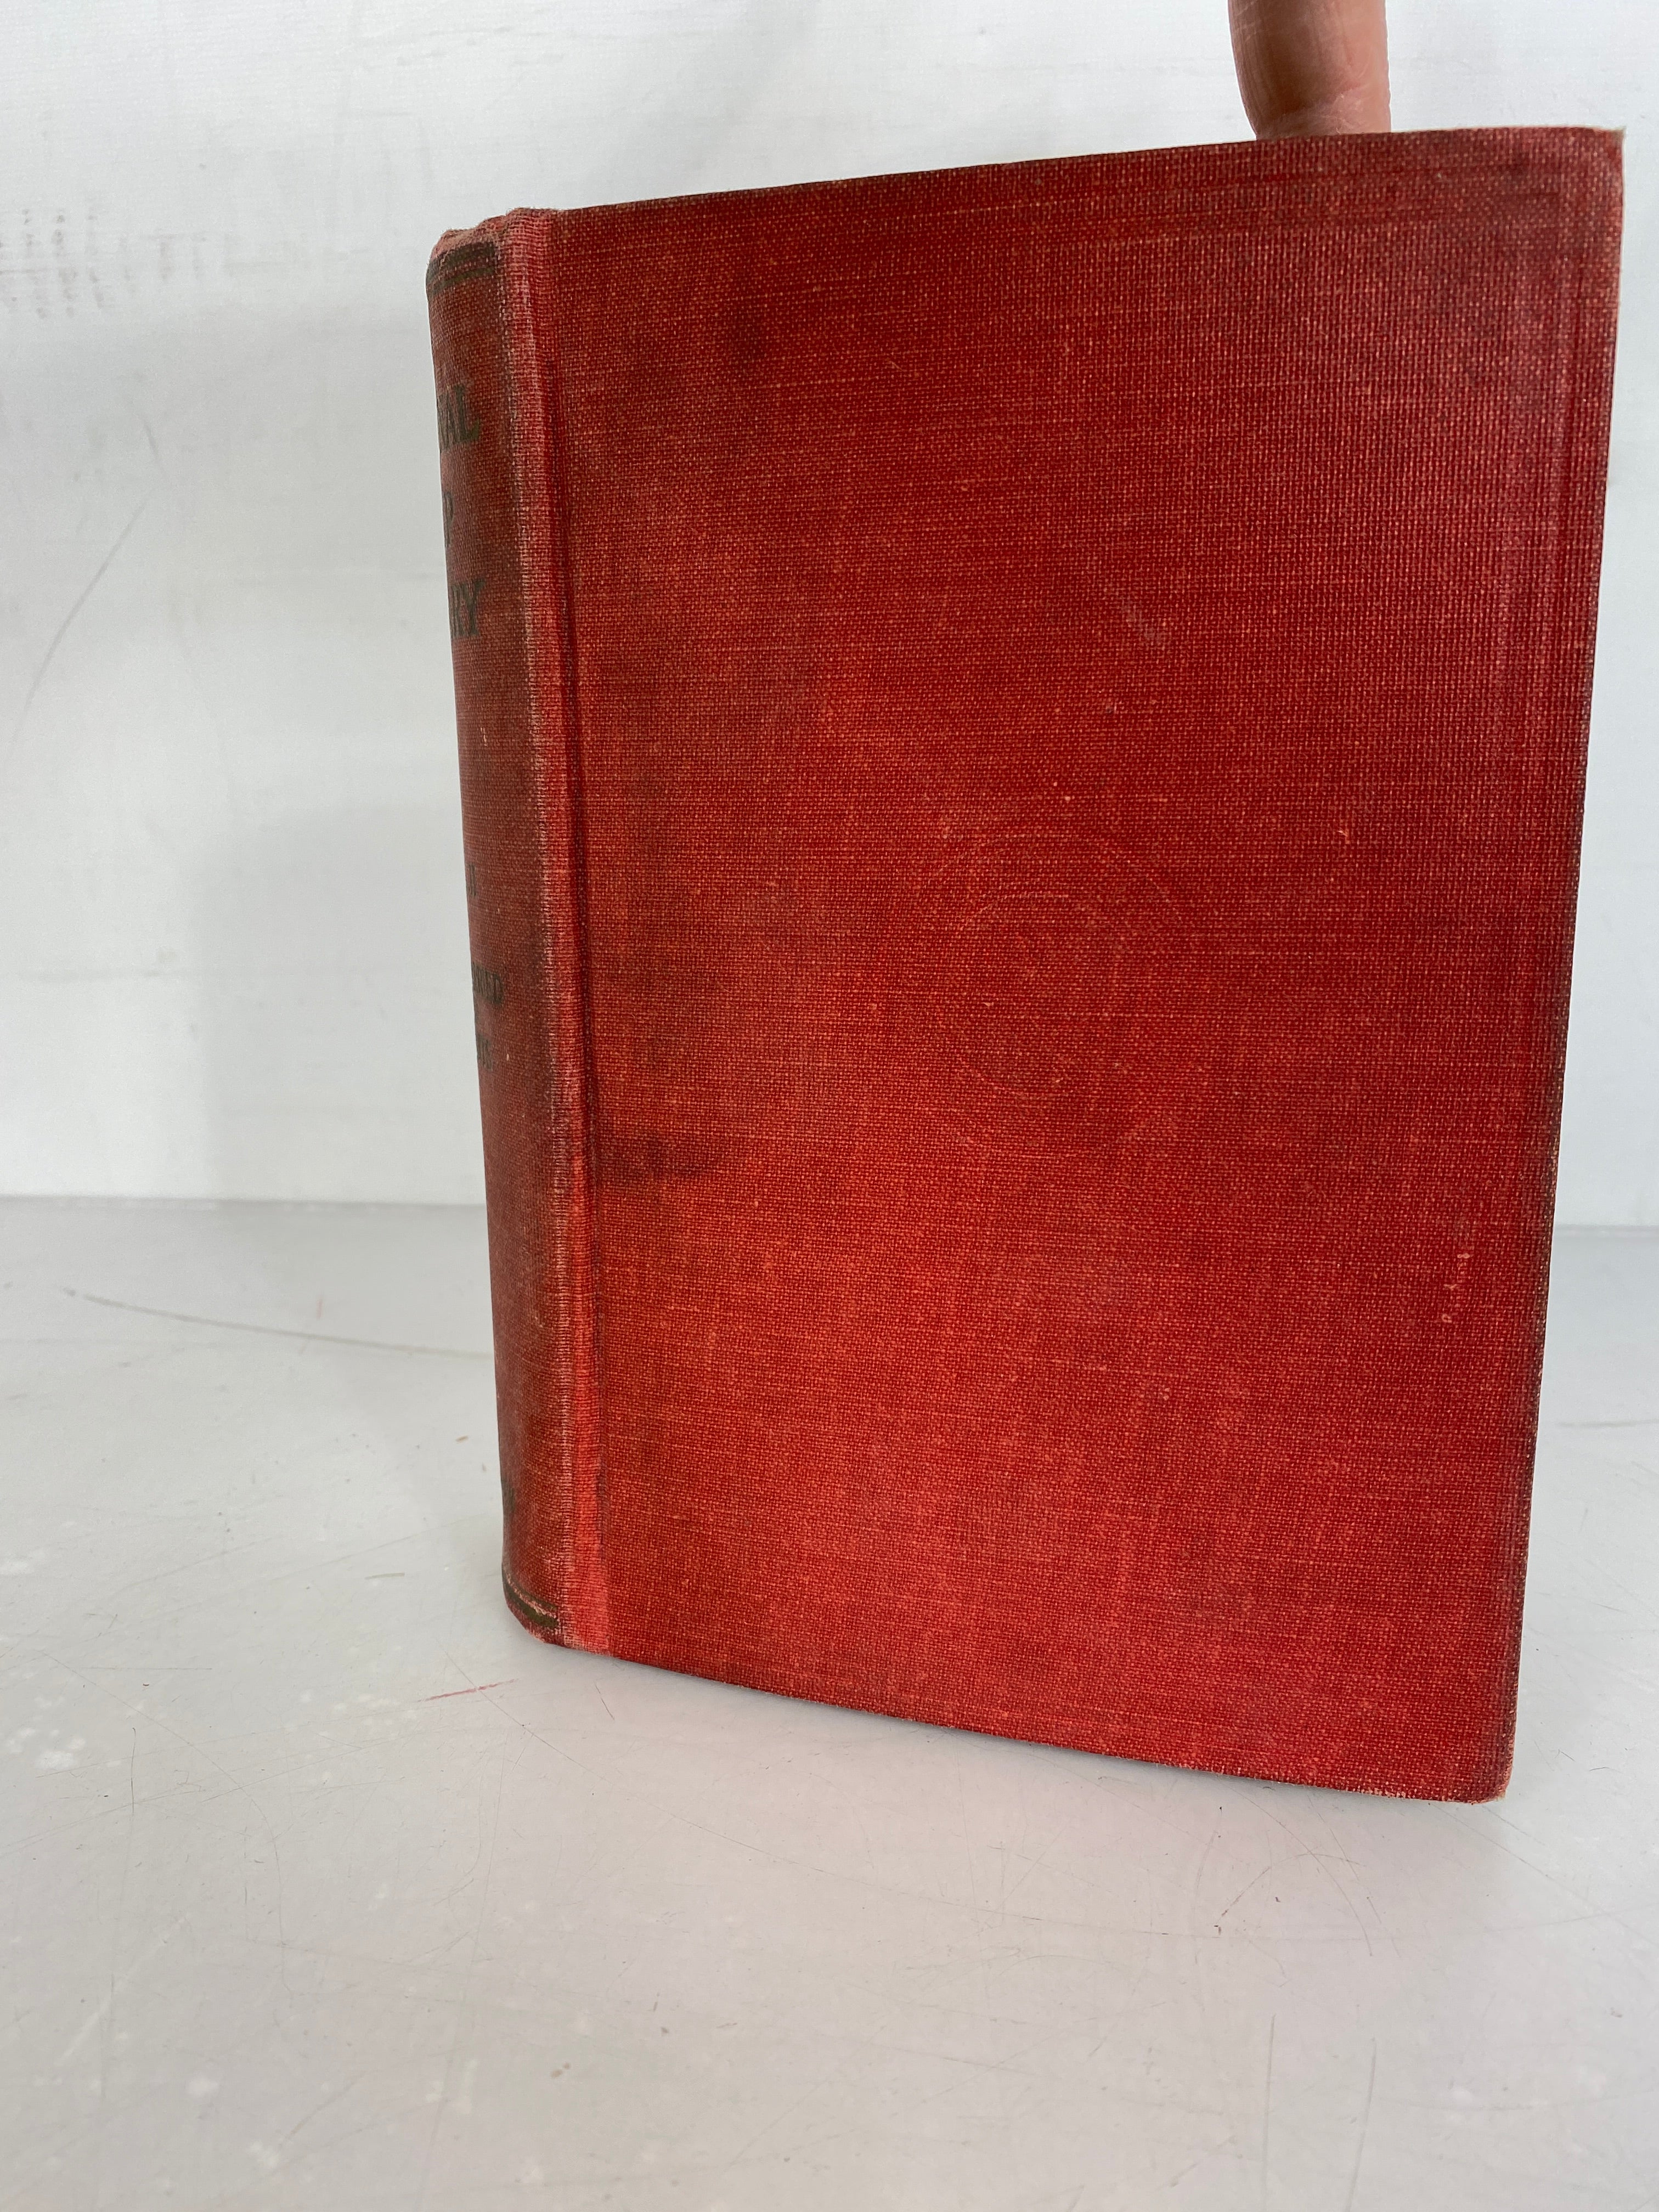 Personal Help for the Married by Thomas Shannon and W.J. Truitt 1918 HC